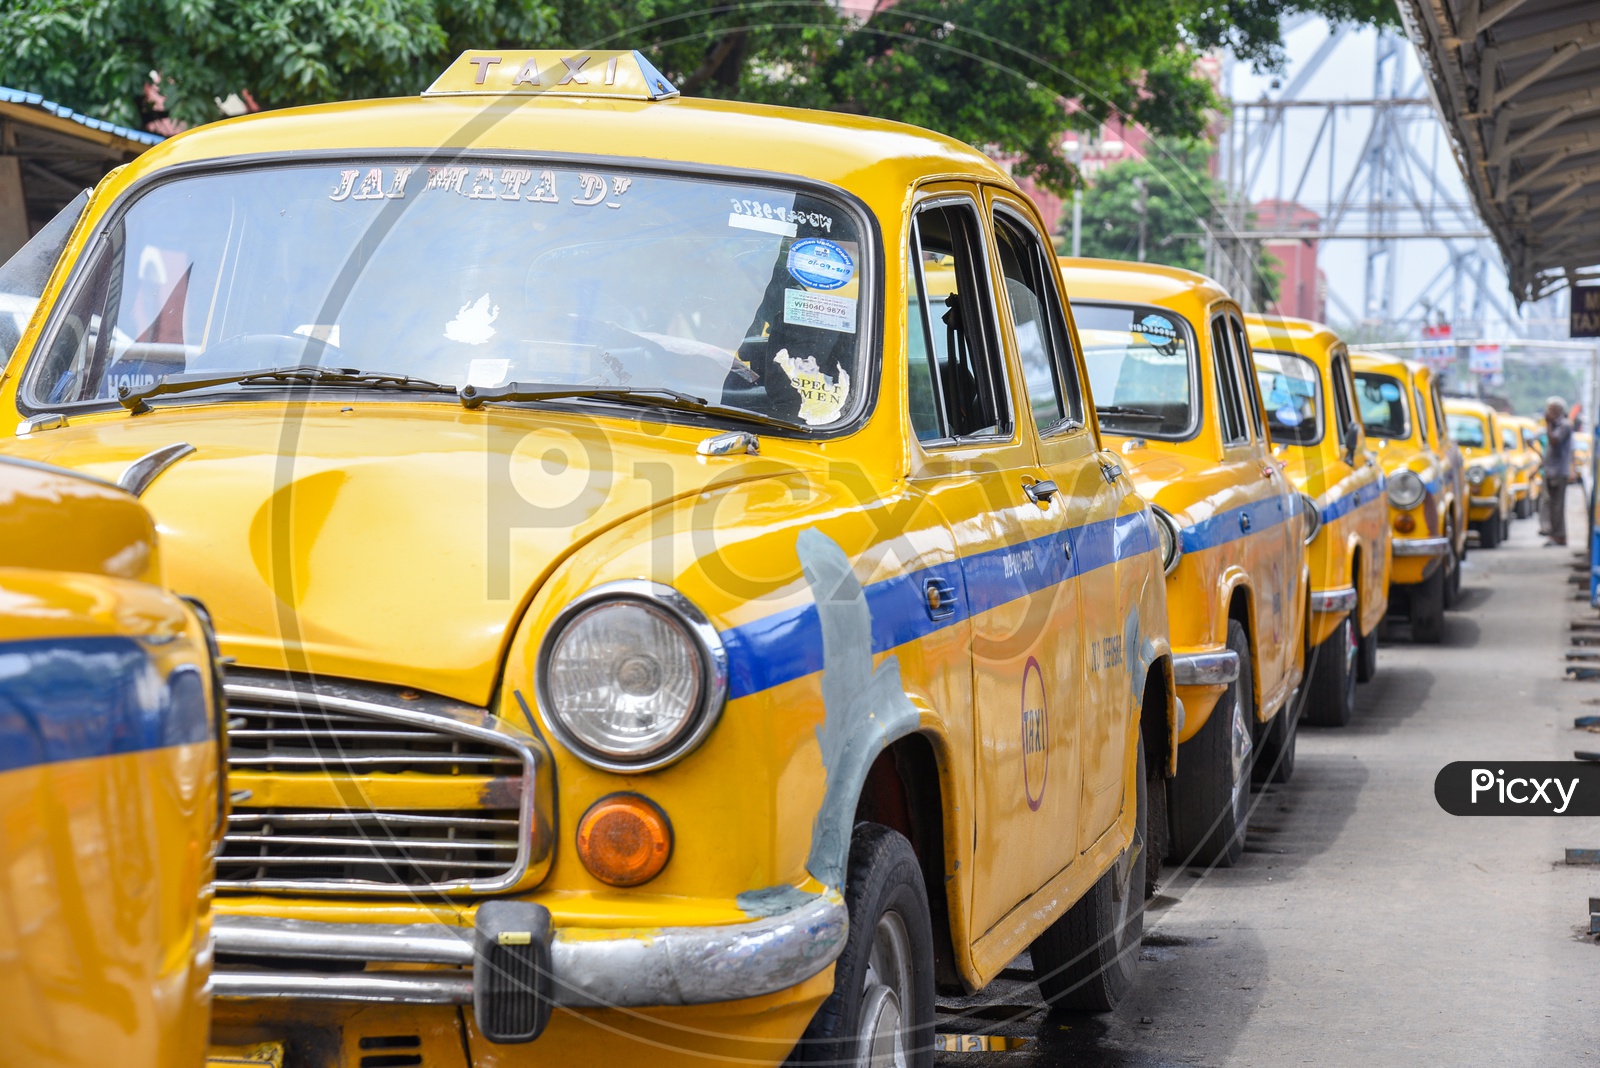 Yellow Color Cabs Or Taxi At Howrah Railway Station